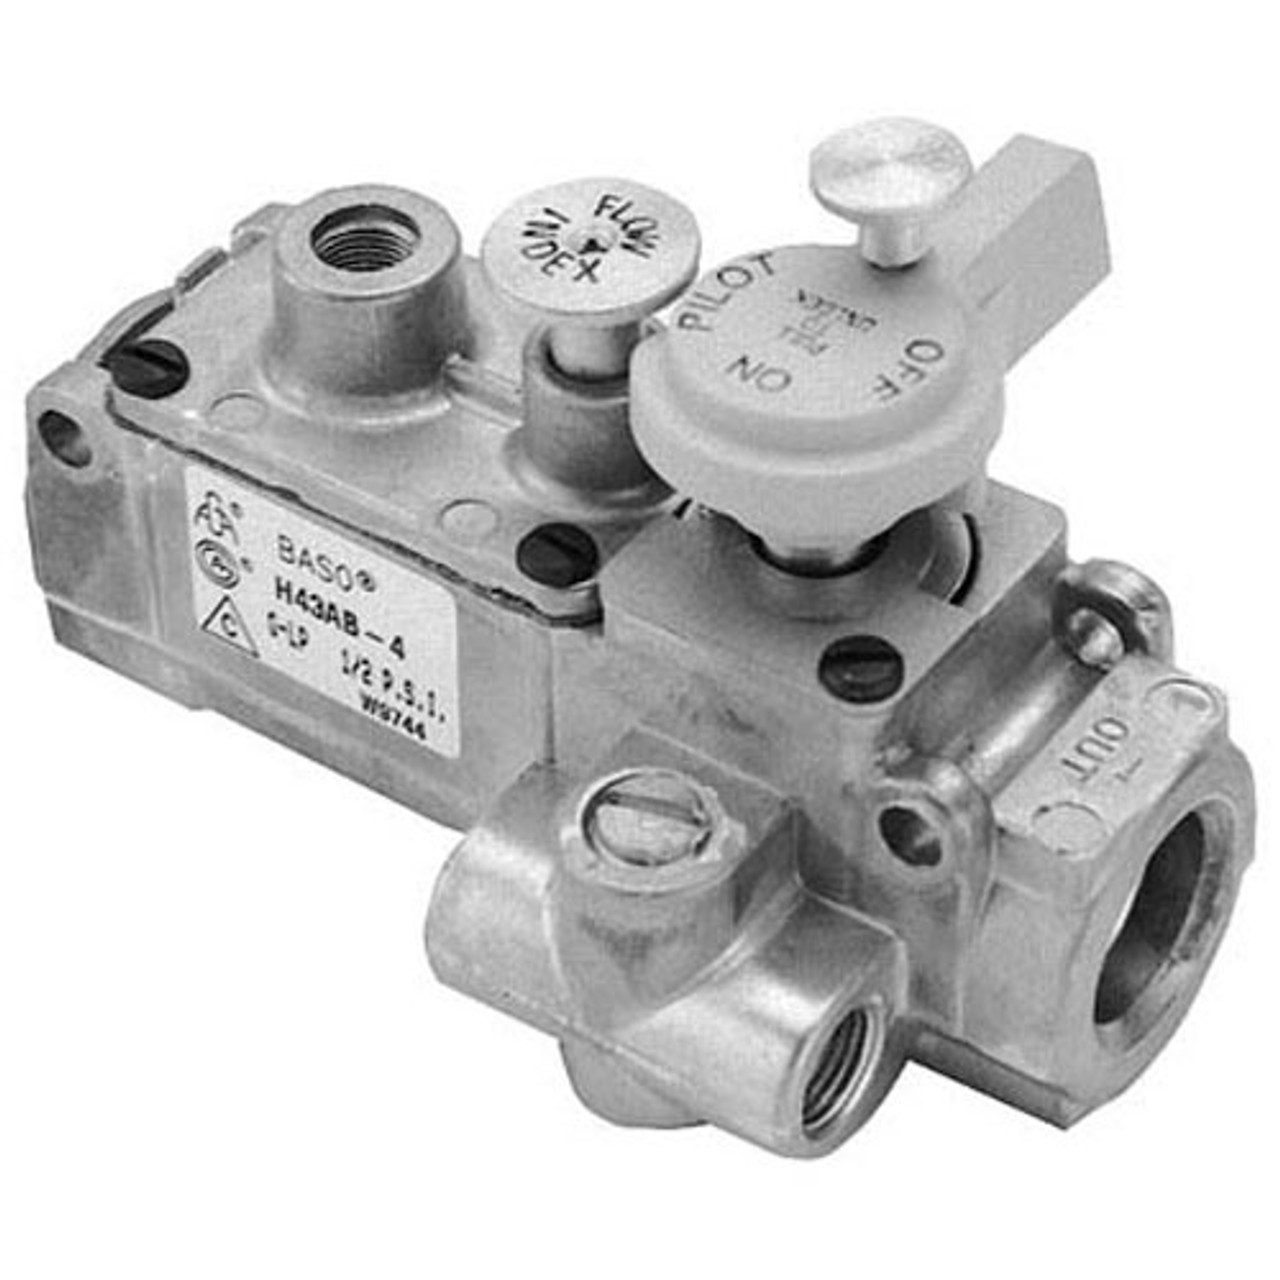 Safety Pilot Valve 1/2" - Replacement Part For Franklin Chef 144610